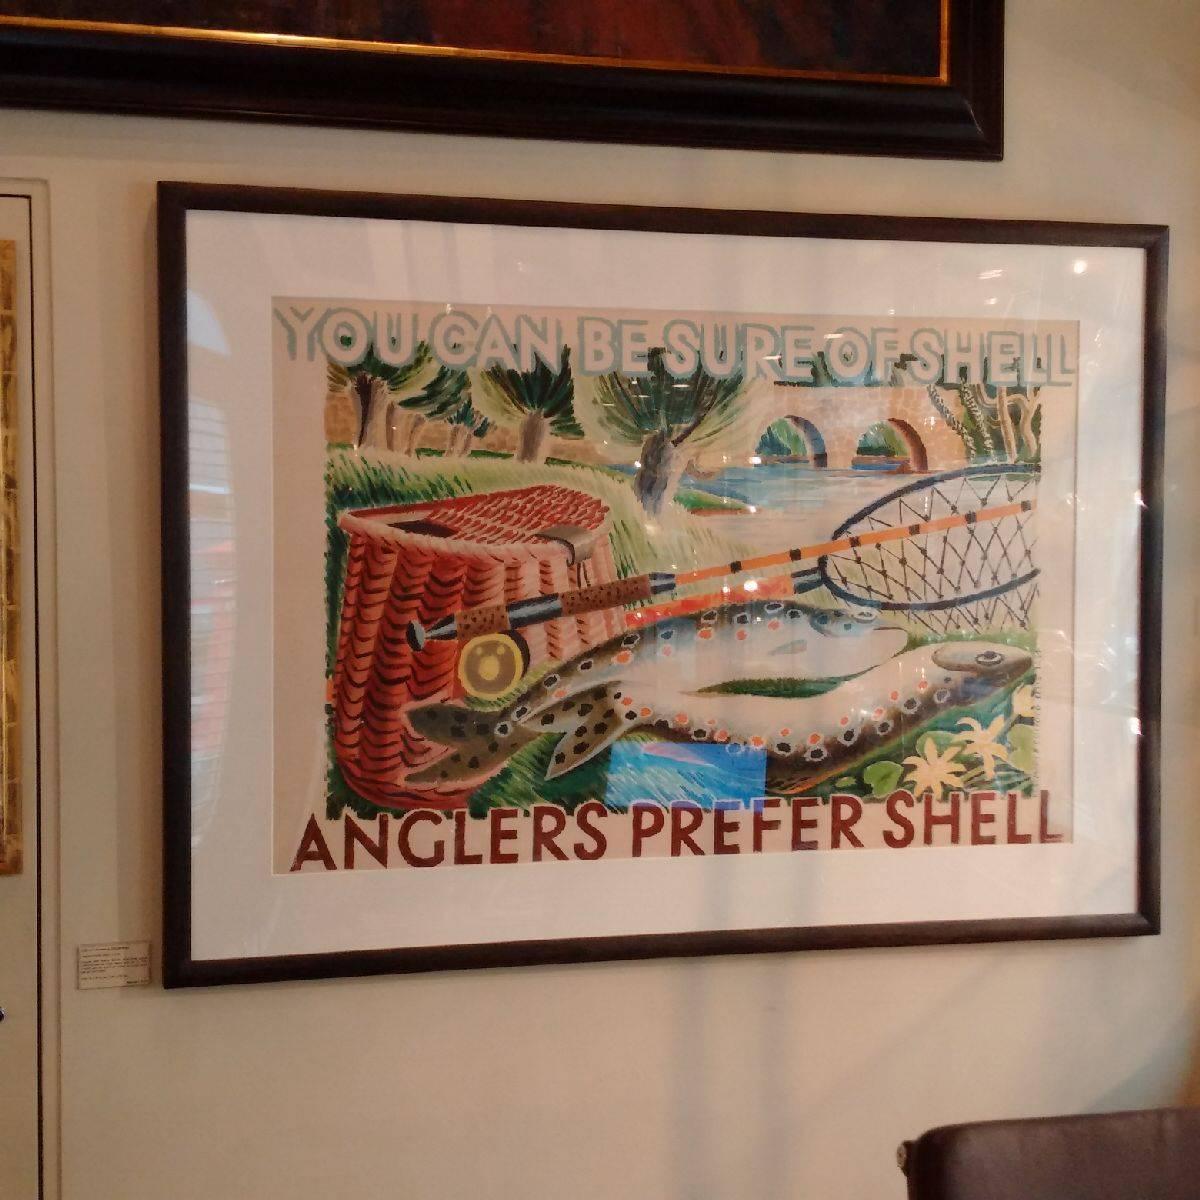 Clifford & Rosemary Ellis (British).
‘Anglers Prefer Shell'. Unusual British advertising poster commissioned by Shell Petrol and Oil in 1935. In the Modern British style, depicting fishing nets and equipment on an English riverbank. 
Framed with